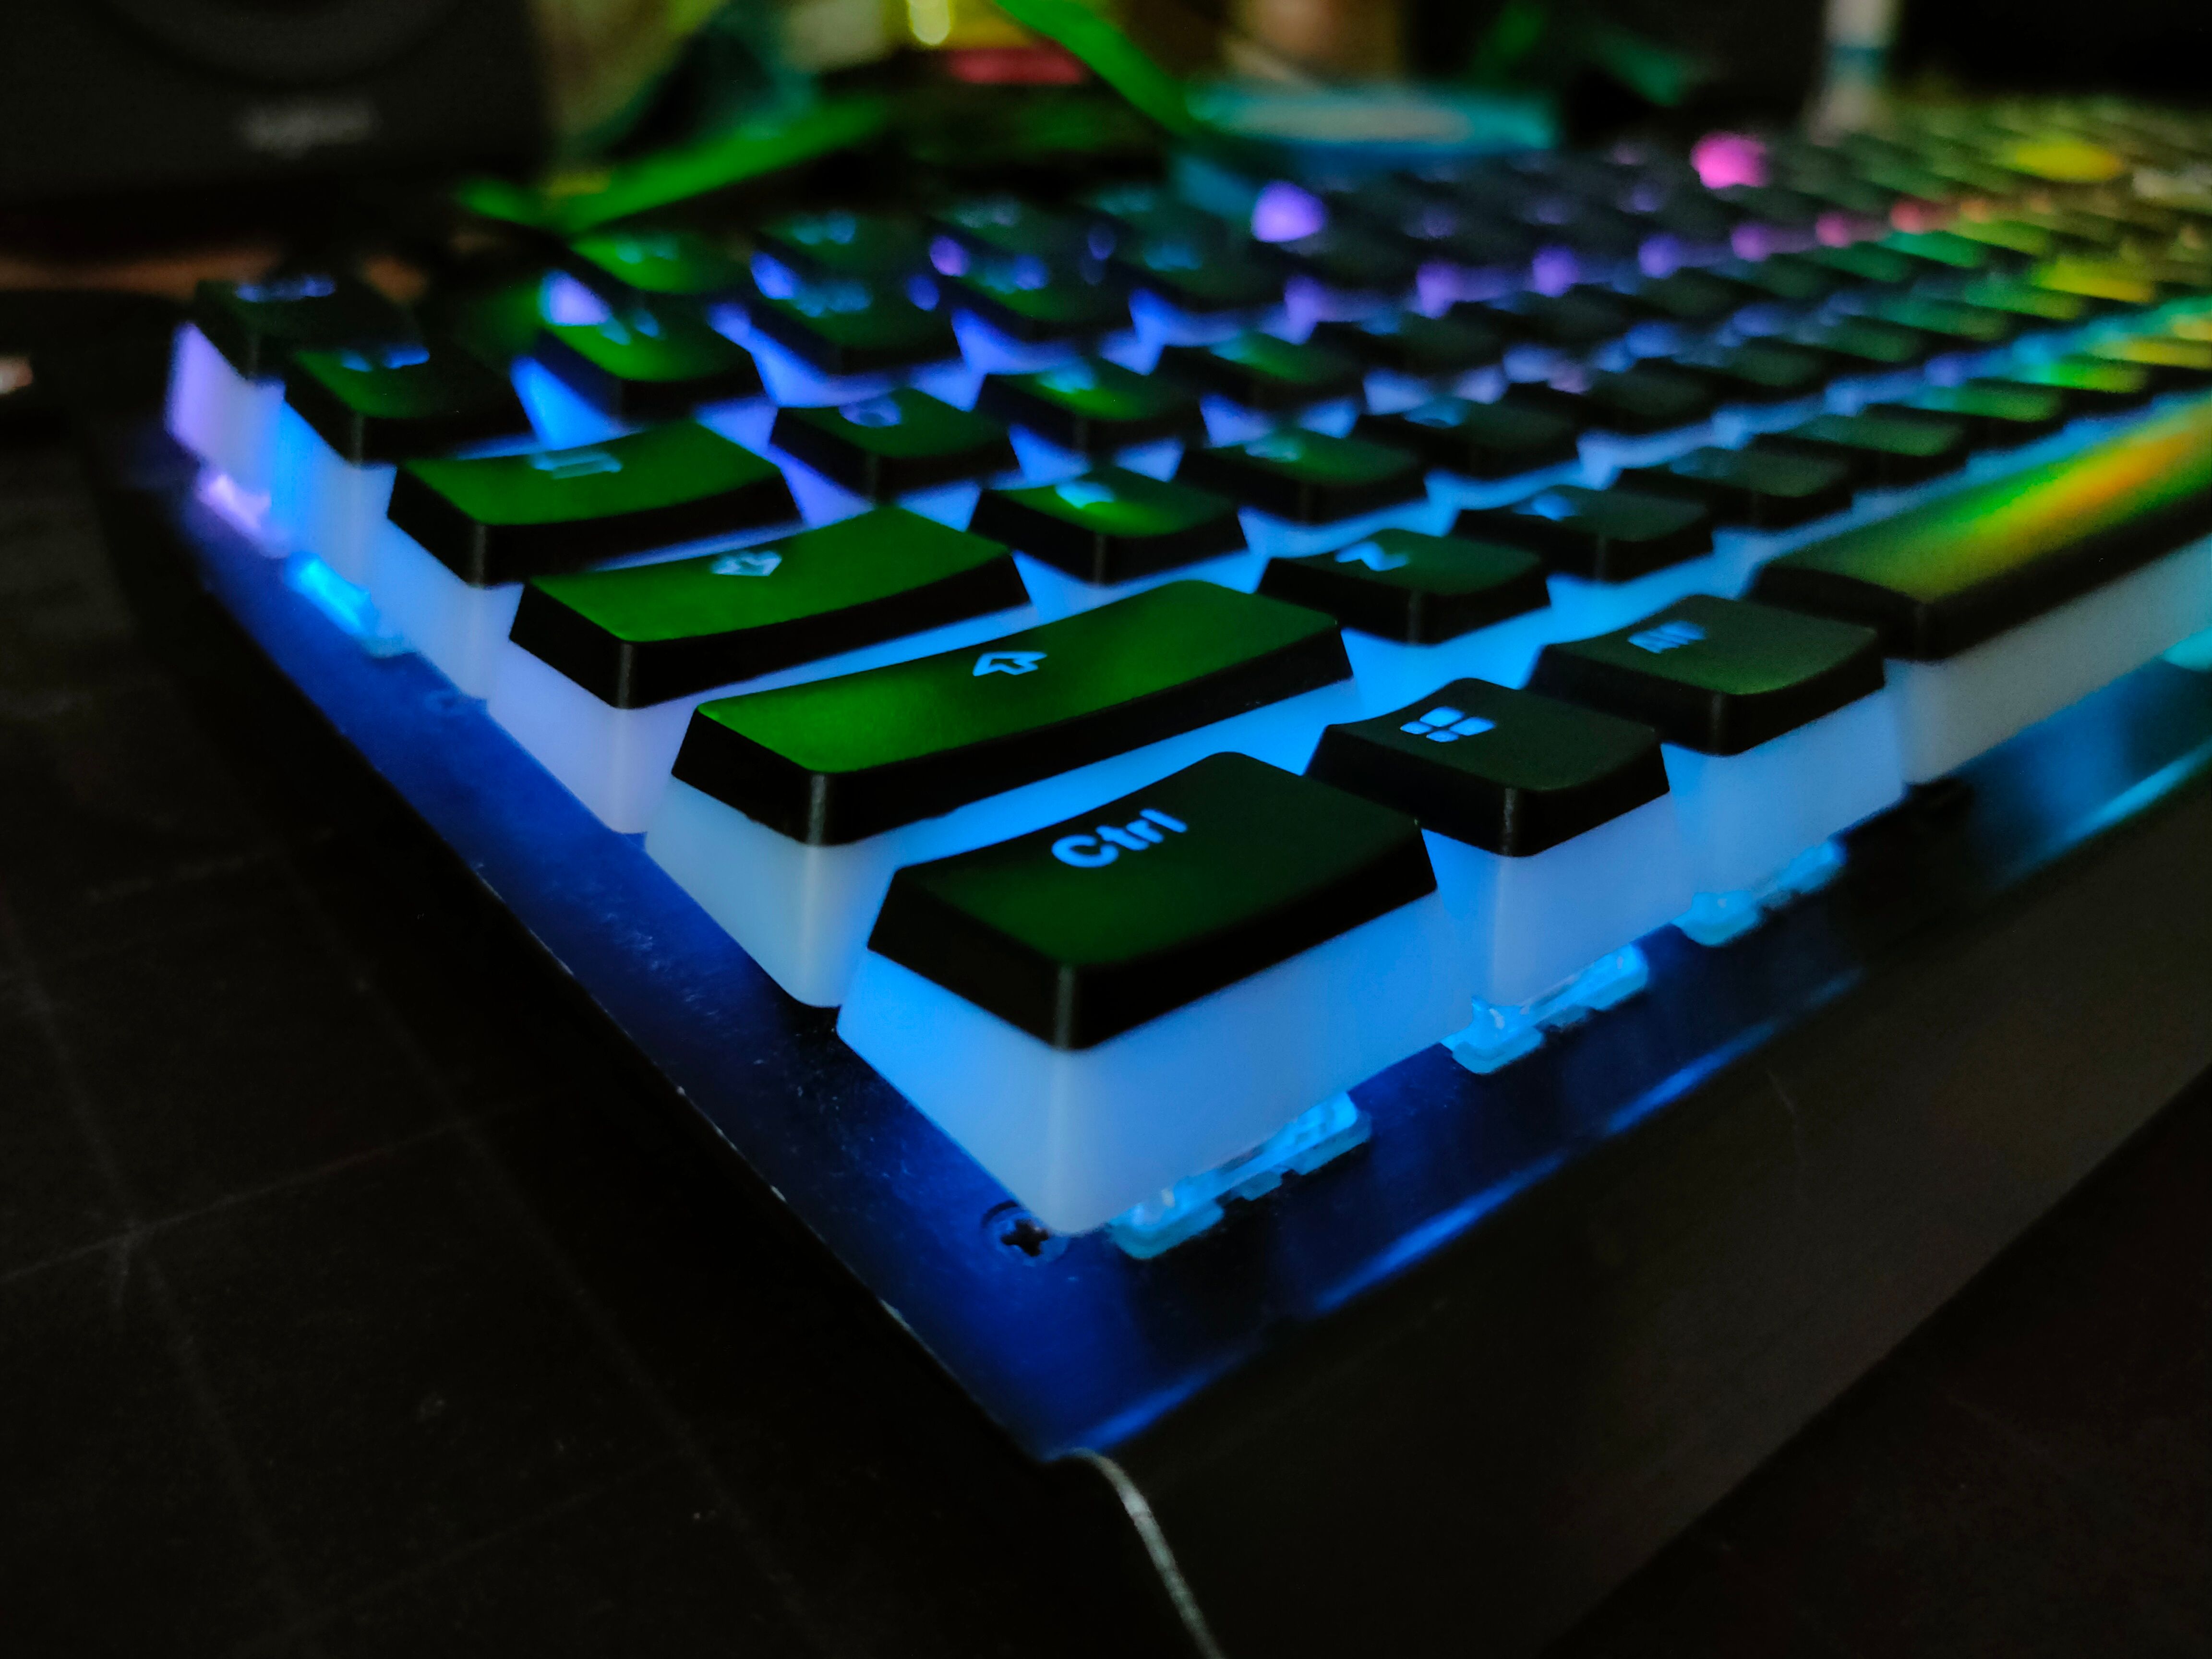 A Corsair K70 keyboard in the dark with pudding keycaps and RGB lights.